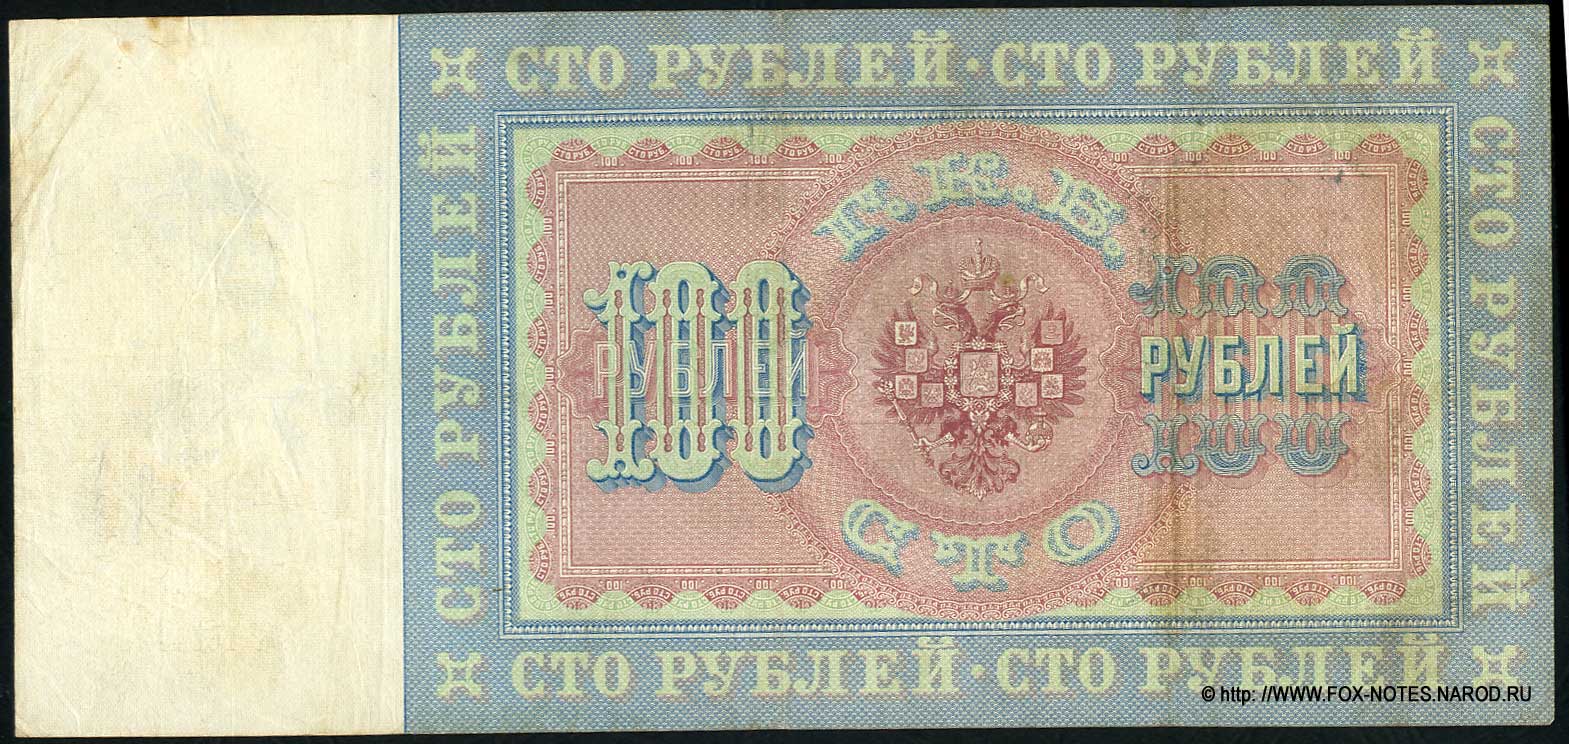 Russian Empire State Credit bank note 100 rubles 1898 / Signature Timashev